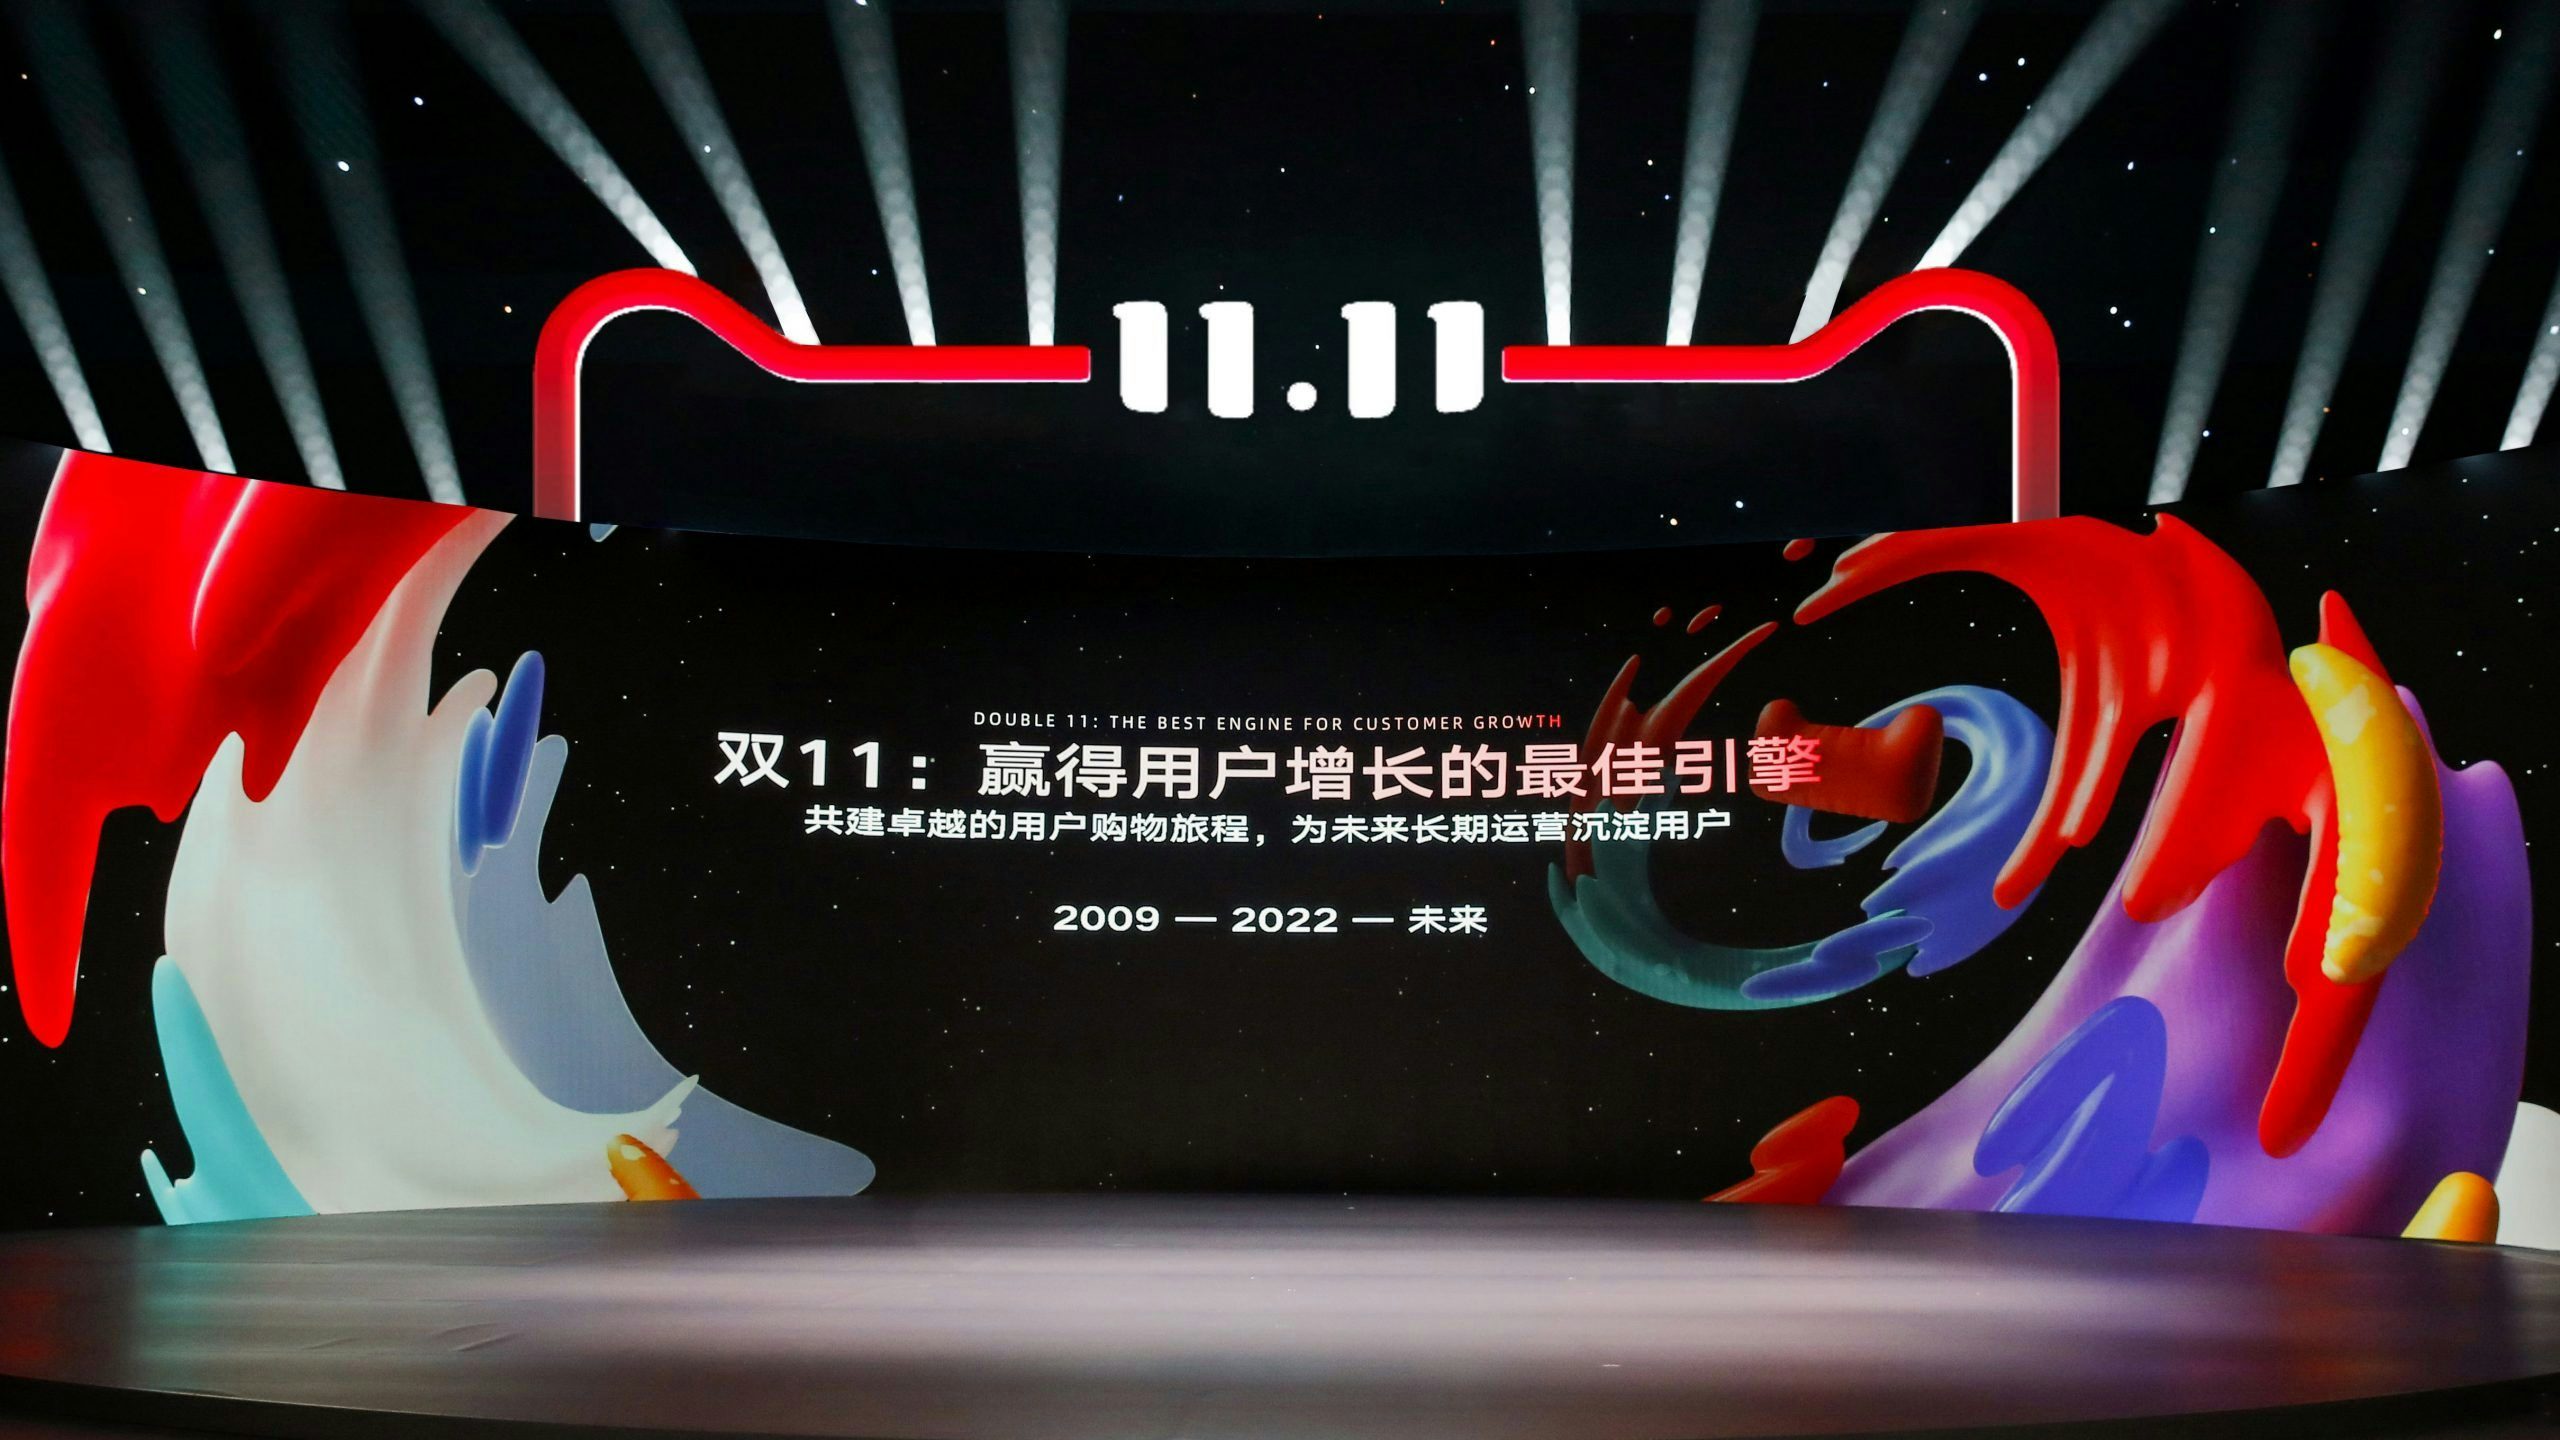 Loyalty Membership Programs Spearhead Alibaba’s New Singles’ Day Growth Opportunities